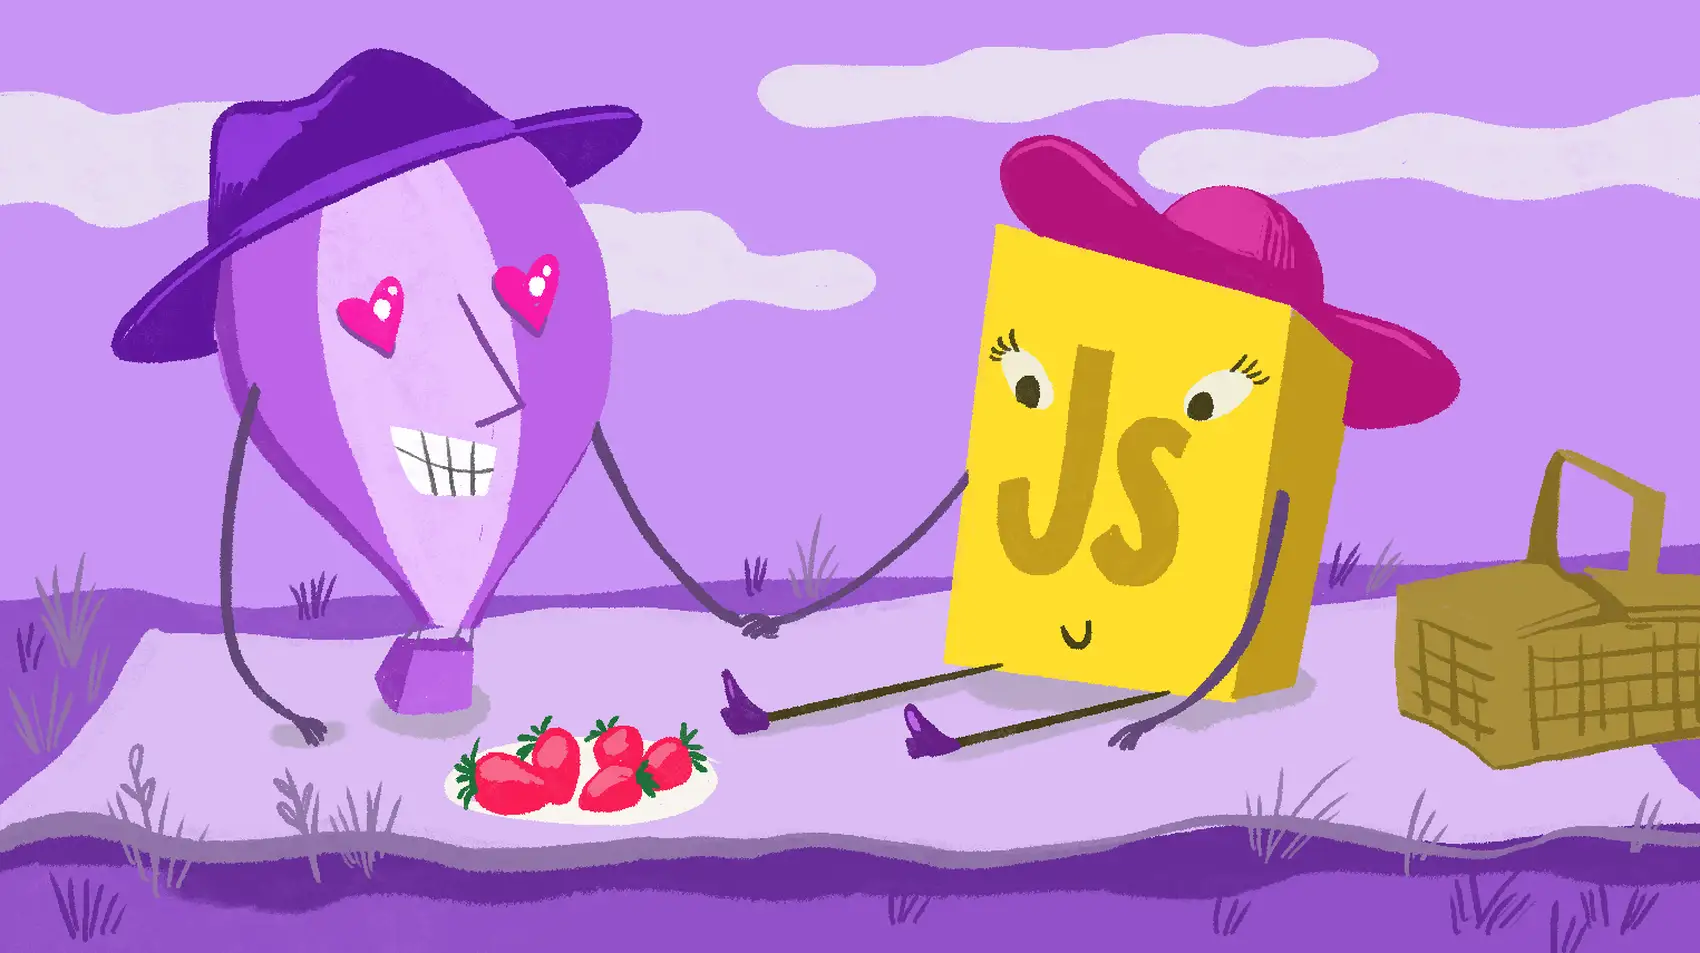 A ballon and the JS logo holding hands and having a picnic lunch